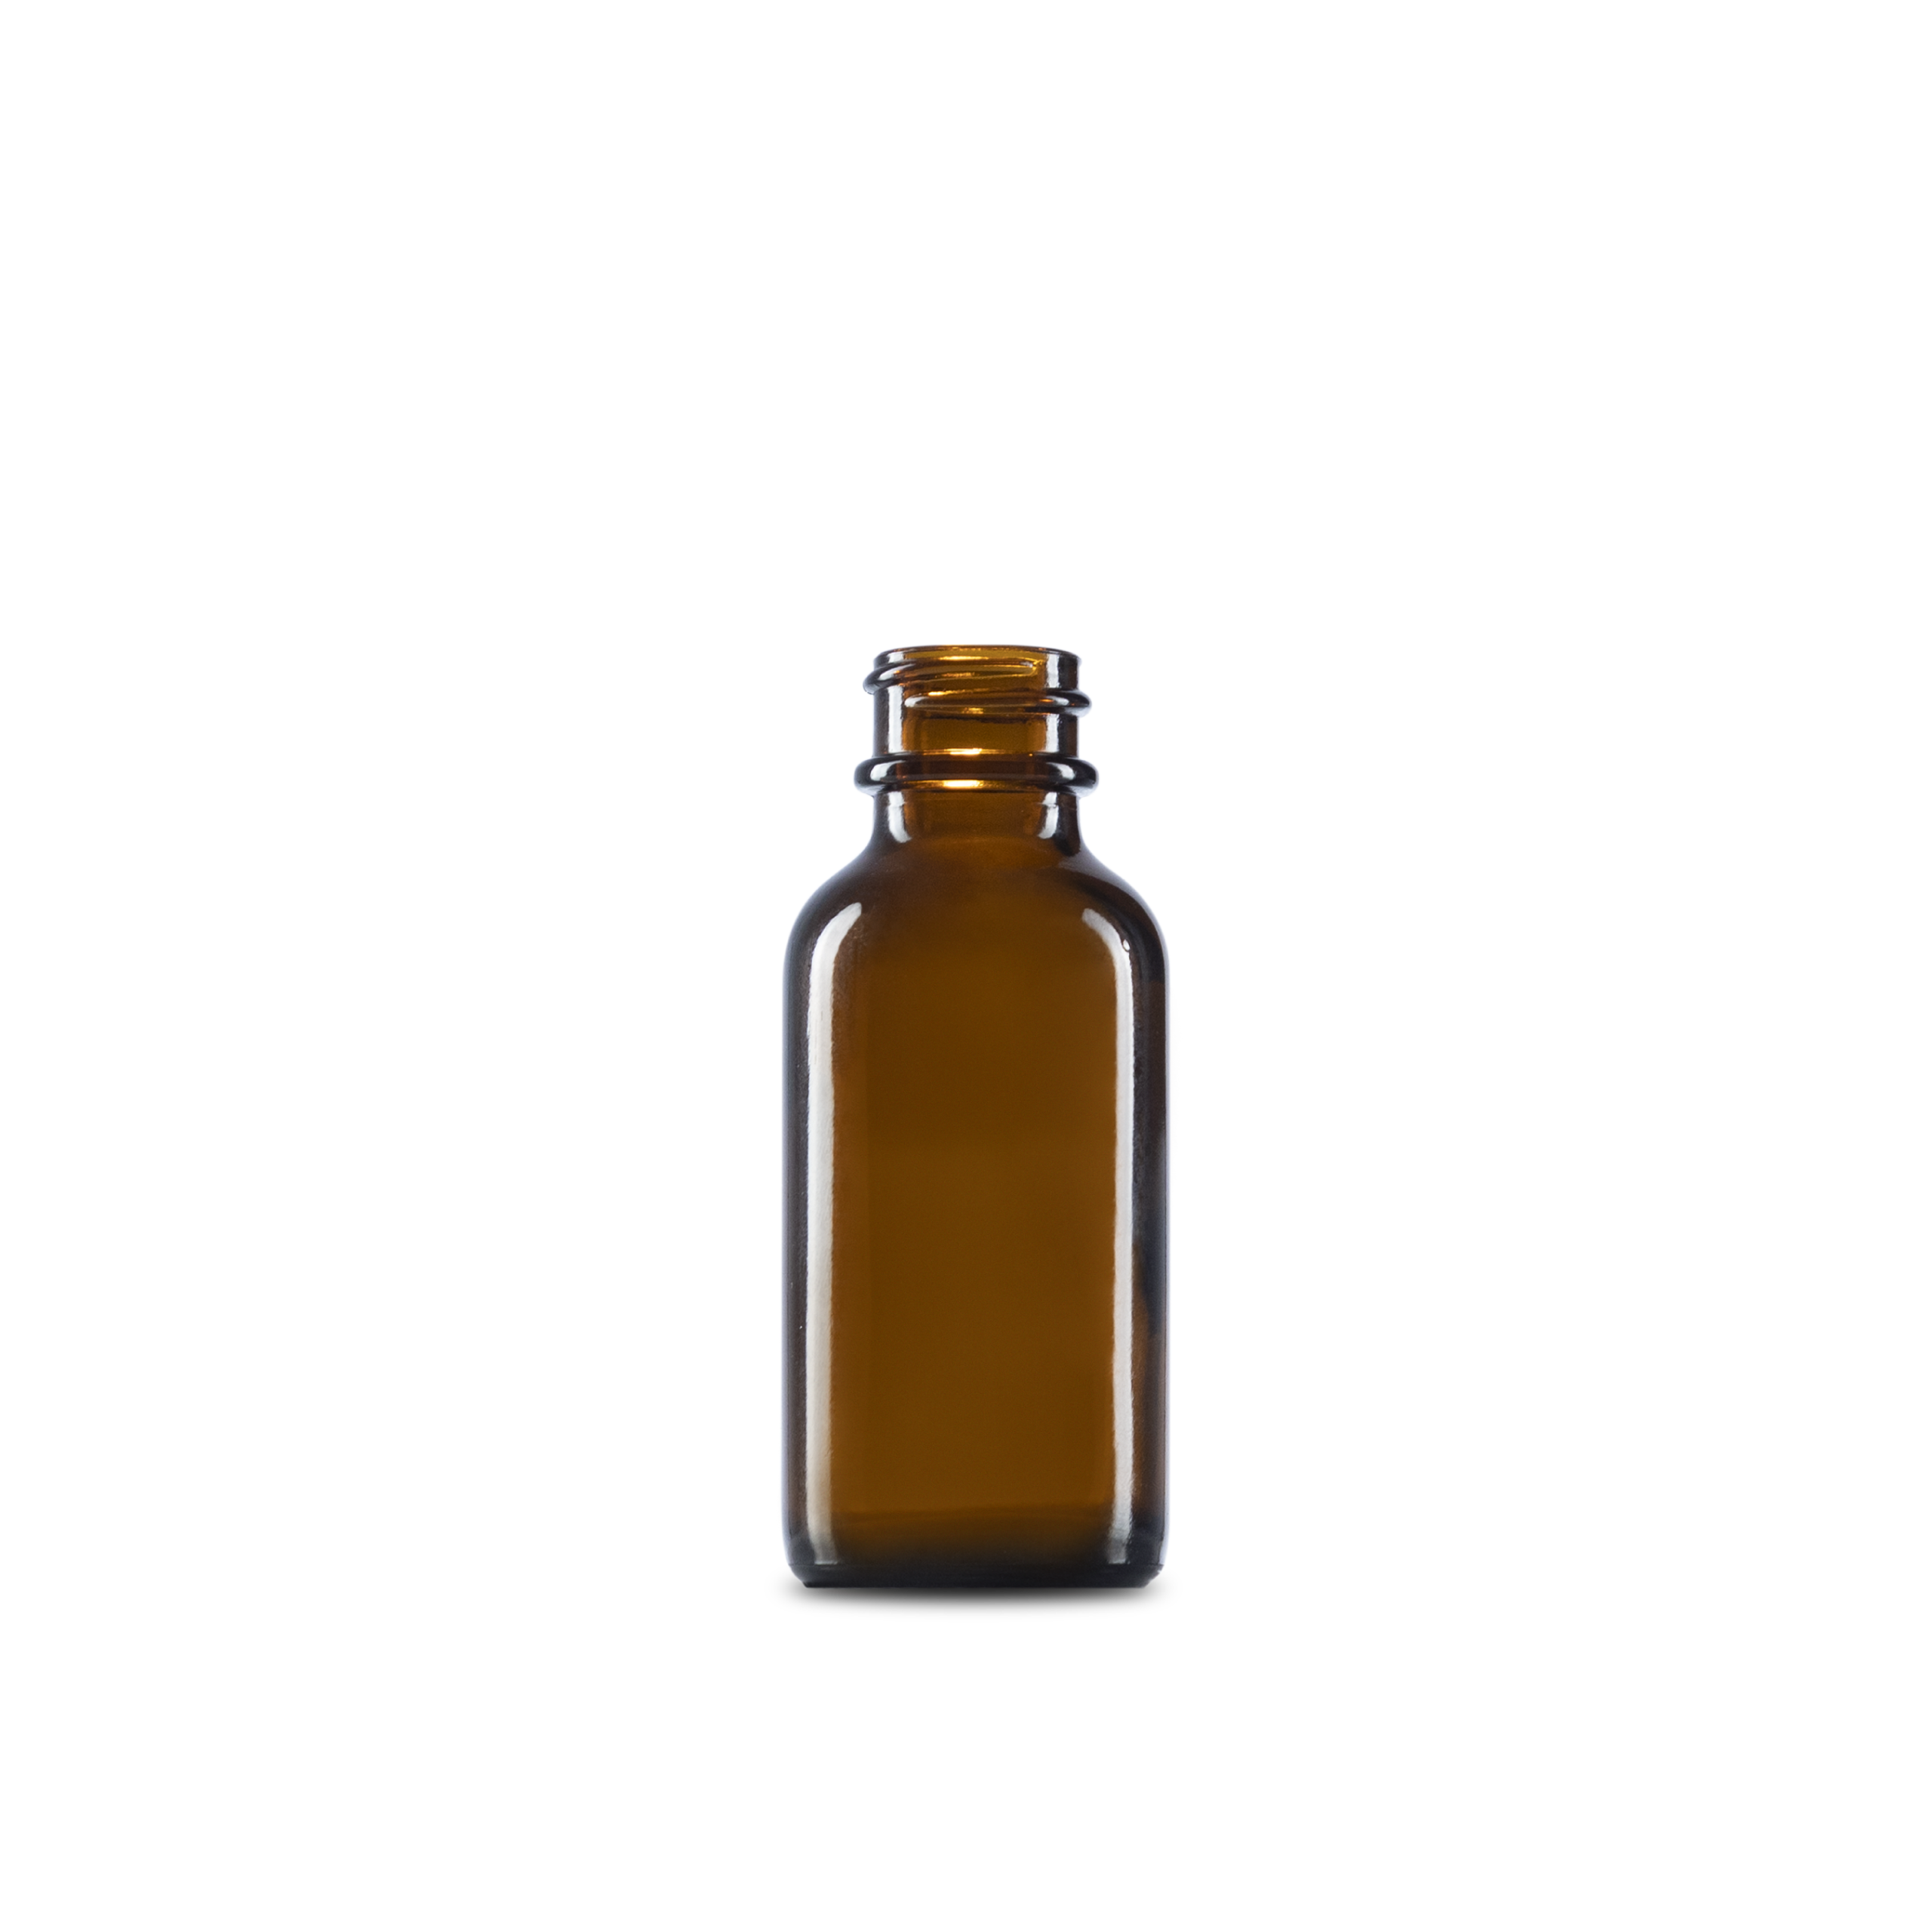 1 oz amber glass bottles are an excellent choice for a variety of products. this bottle is great because it is reusable and biodegradable.